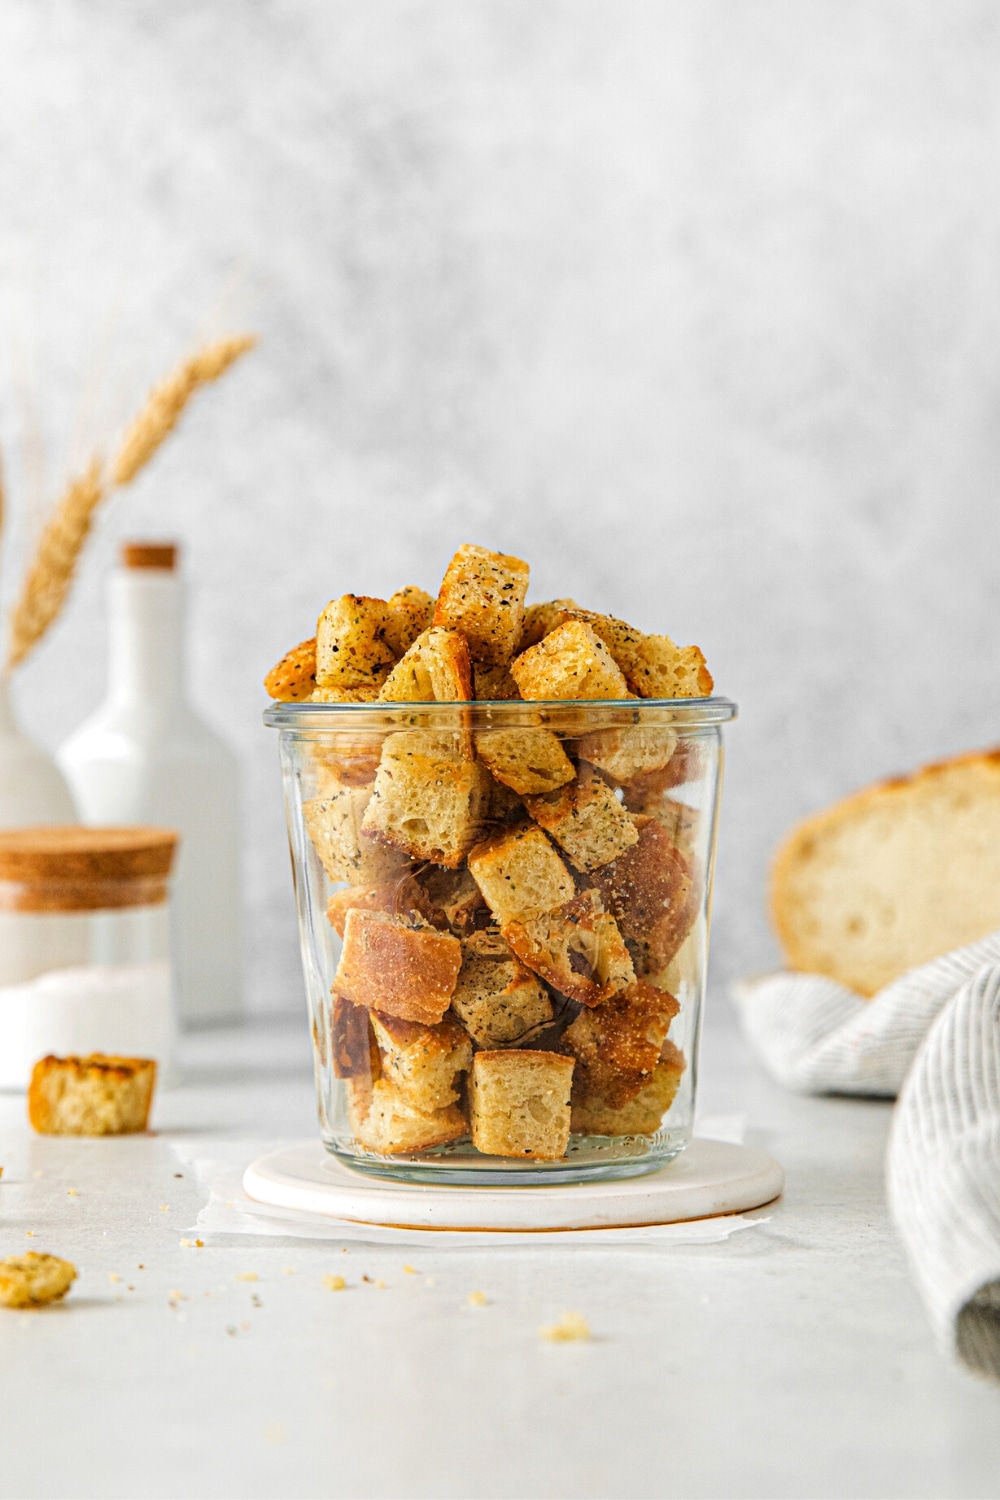 Mini sourdough croutons in a glass jar next to a loaf of sourdough bread.